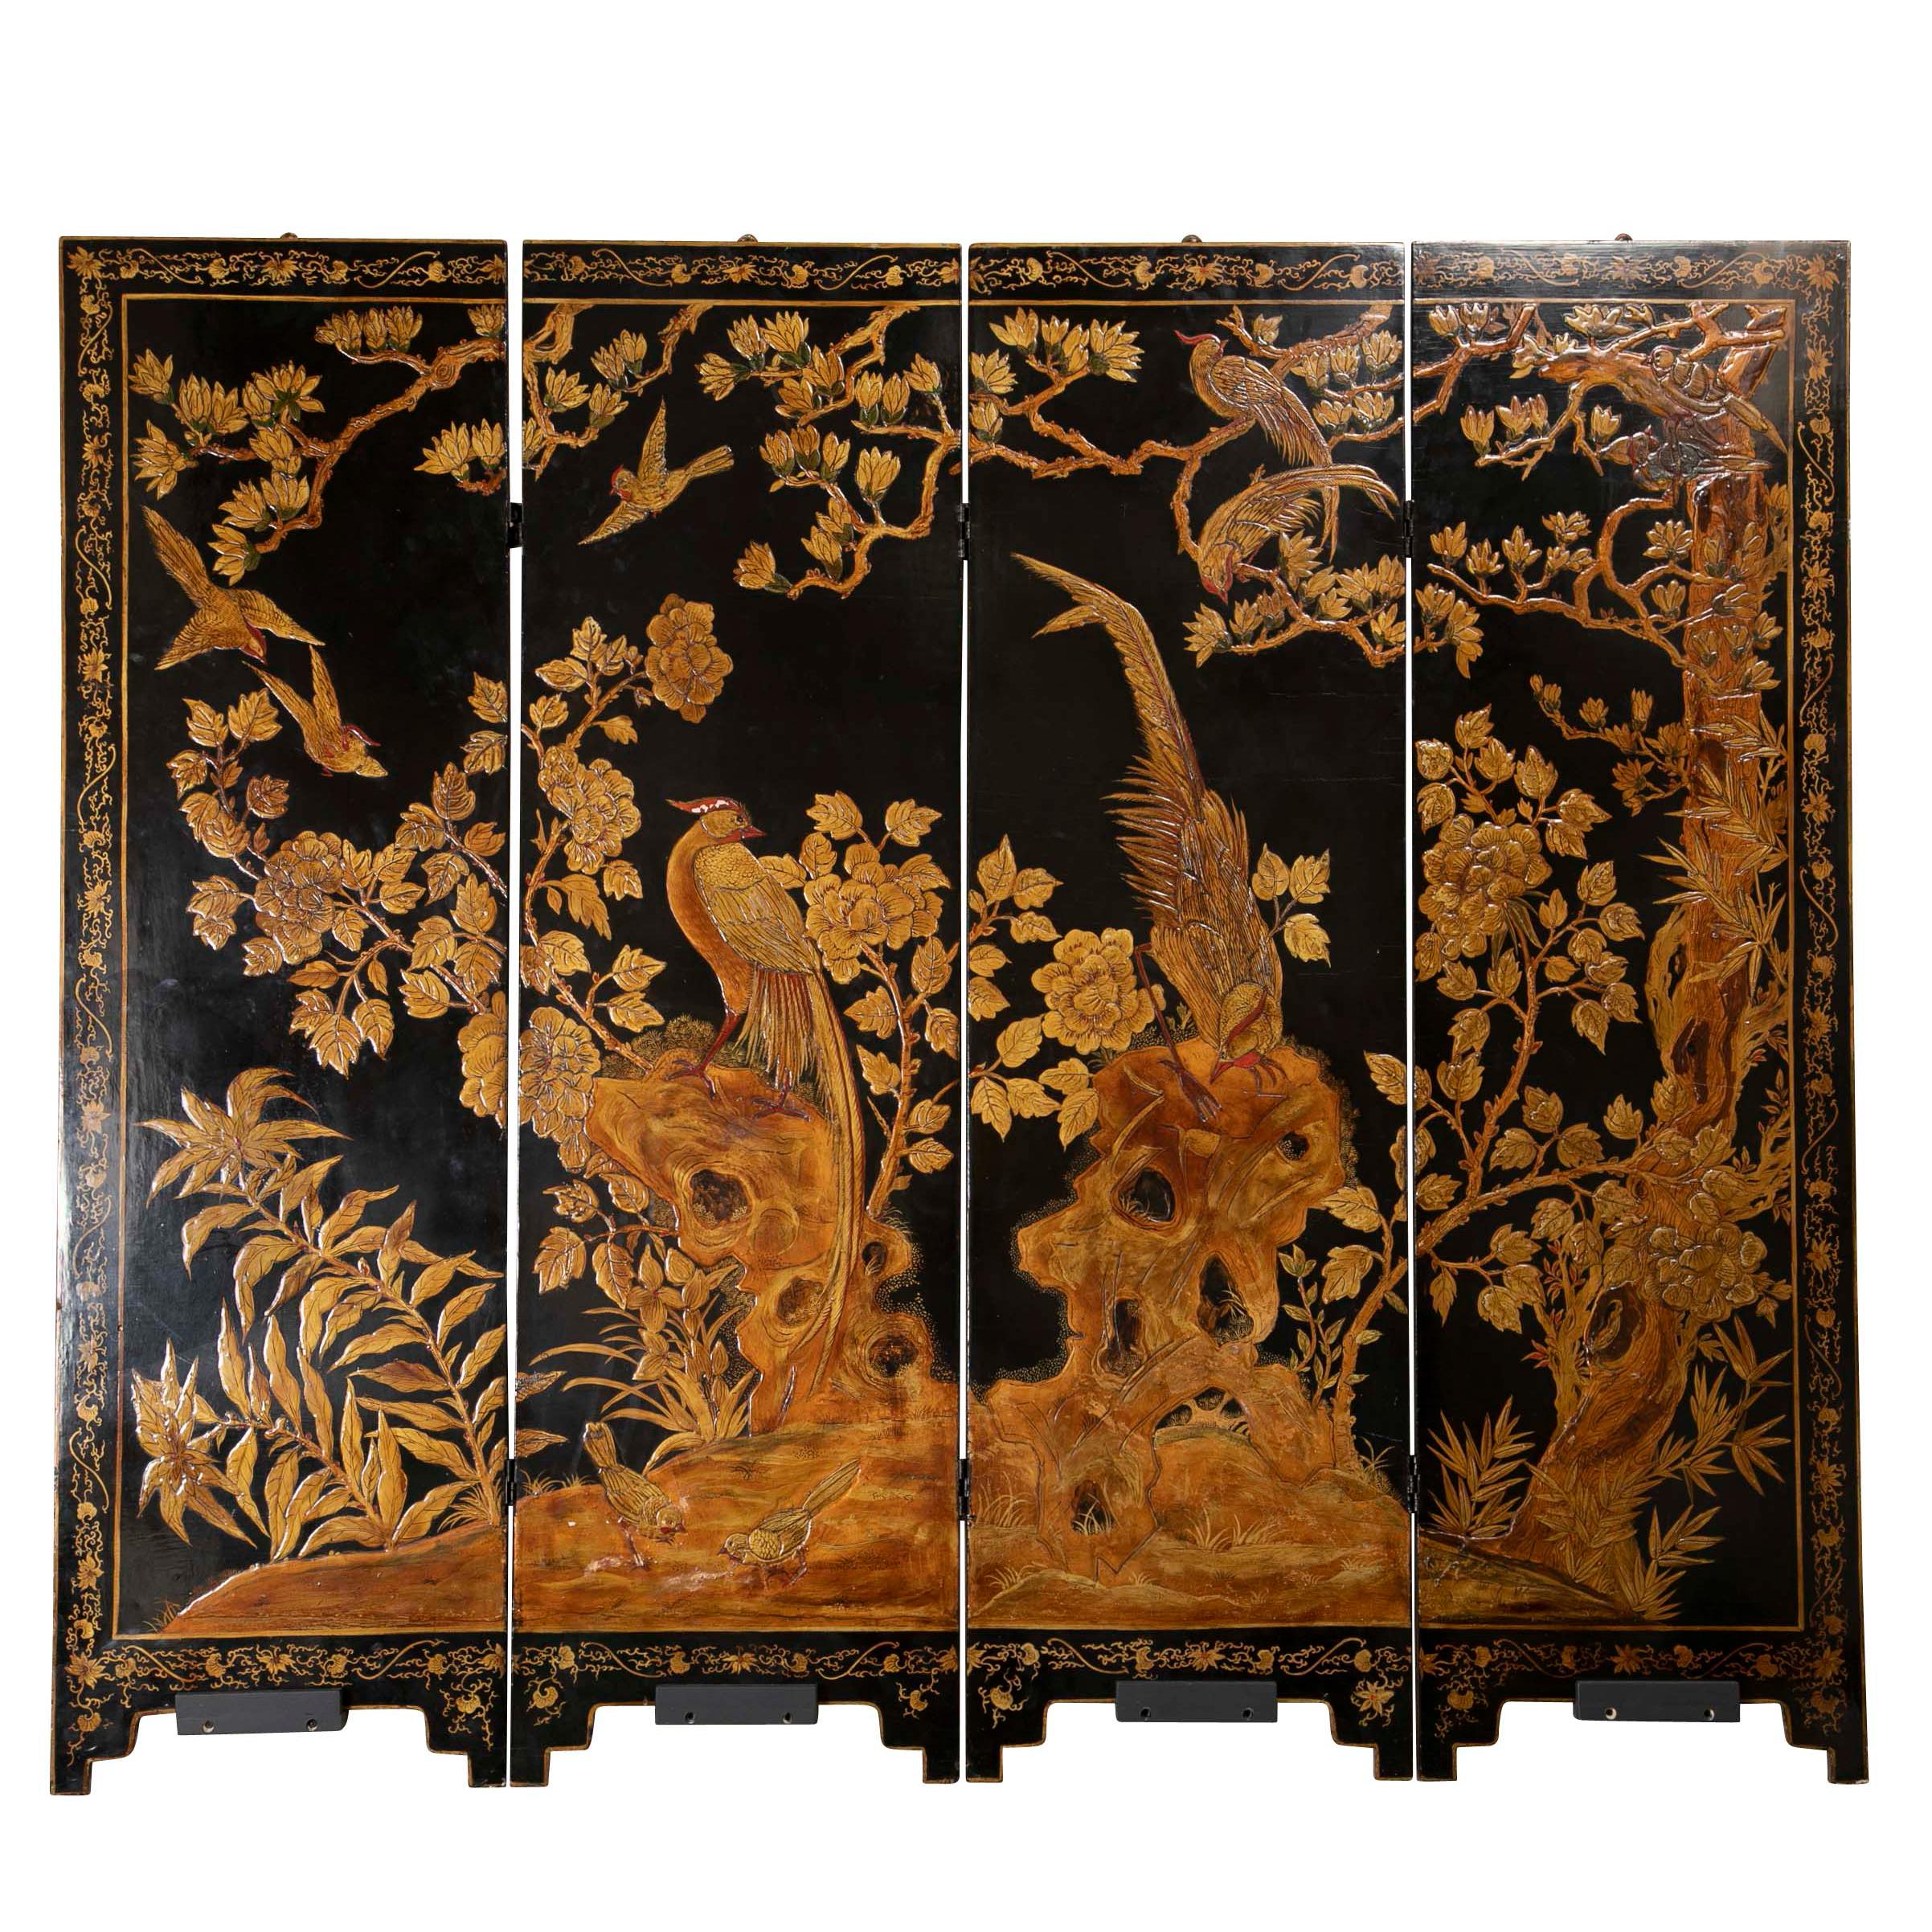 Four Panel Chinese Lacquered Screen Depicting a Phoenix